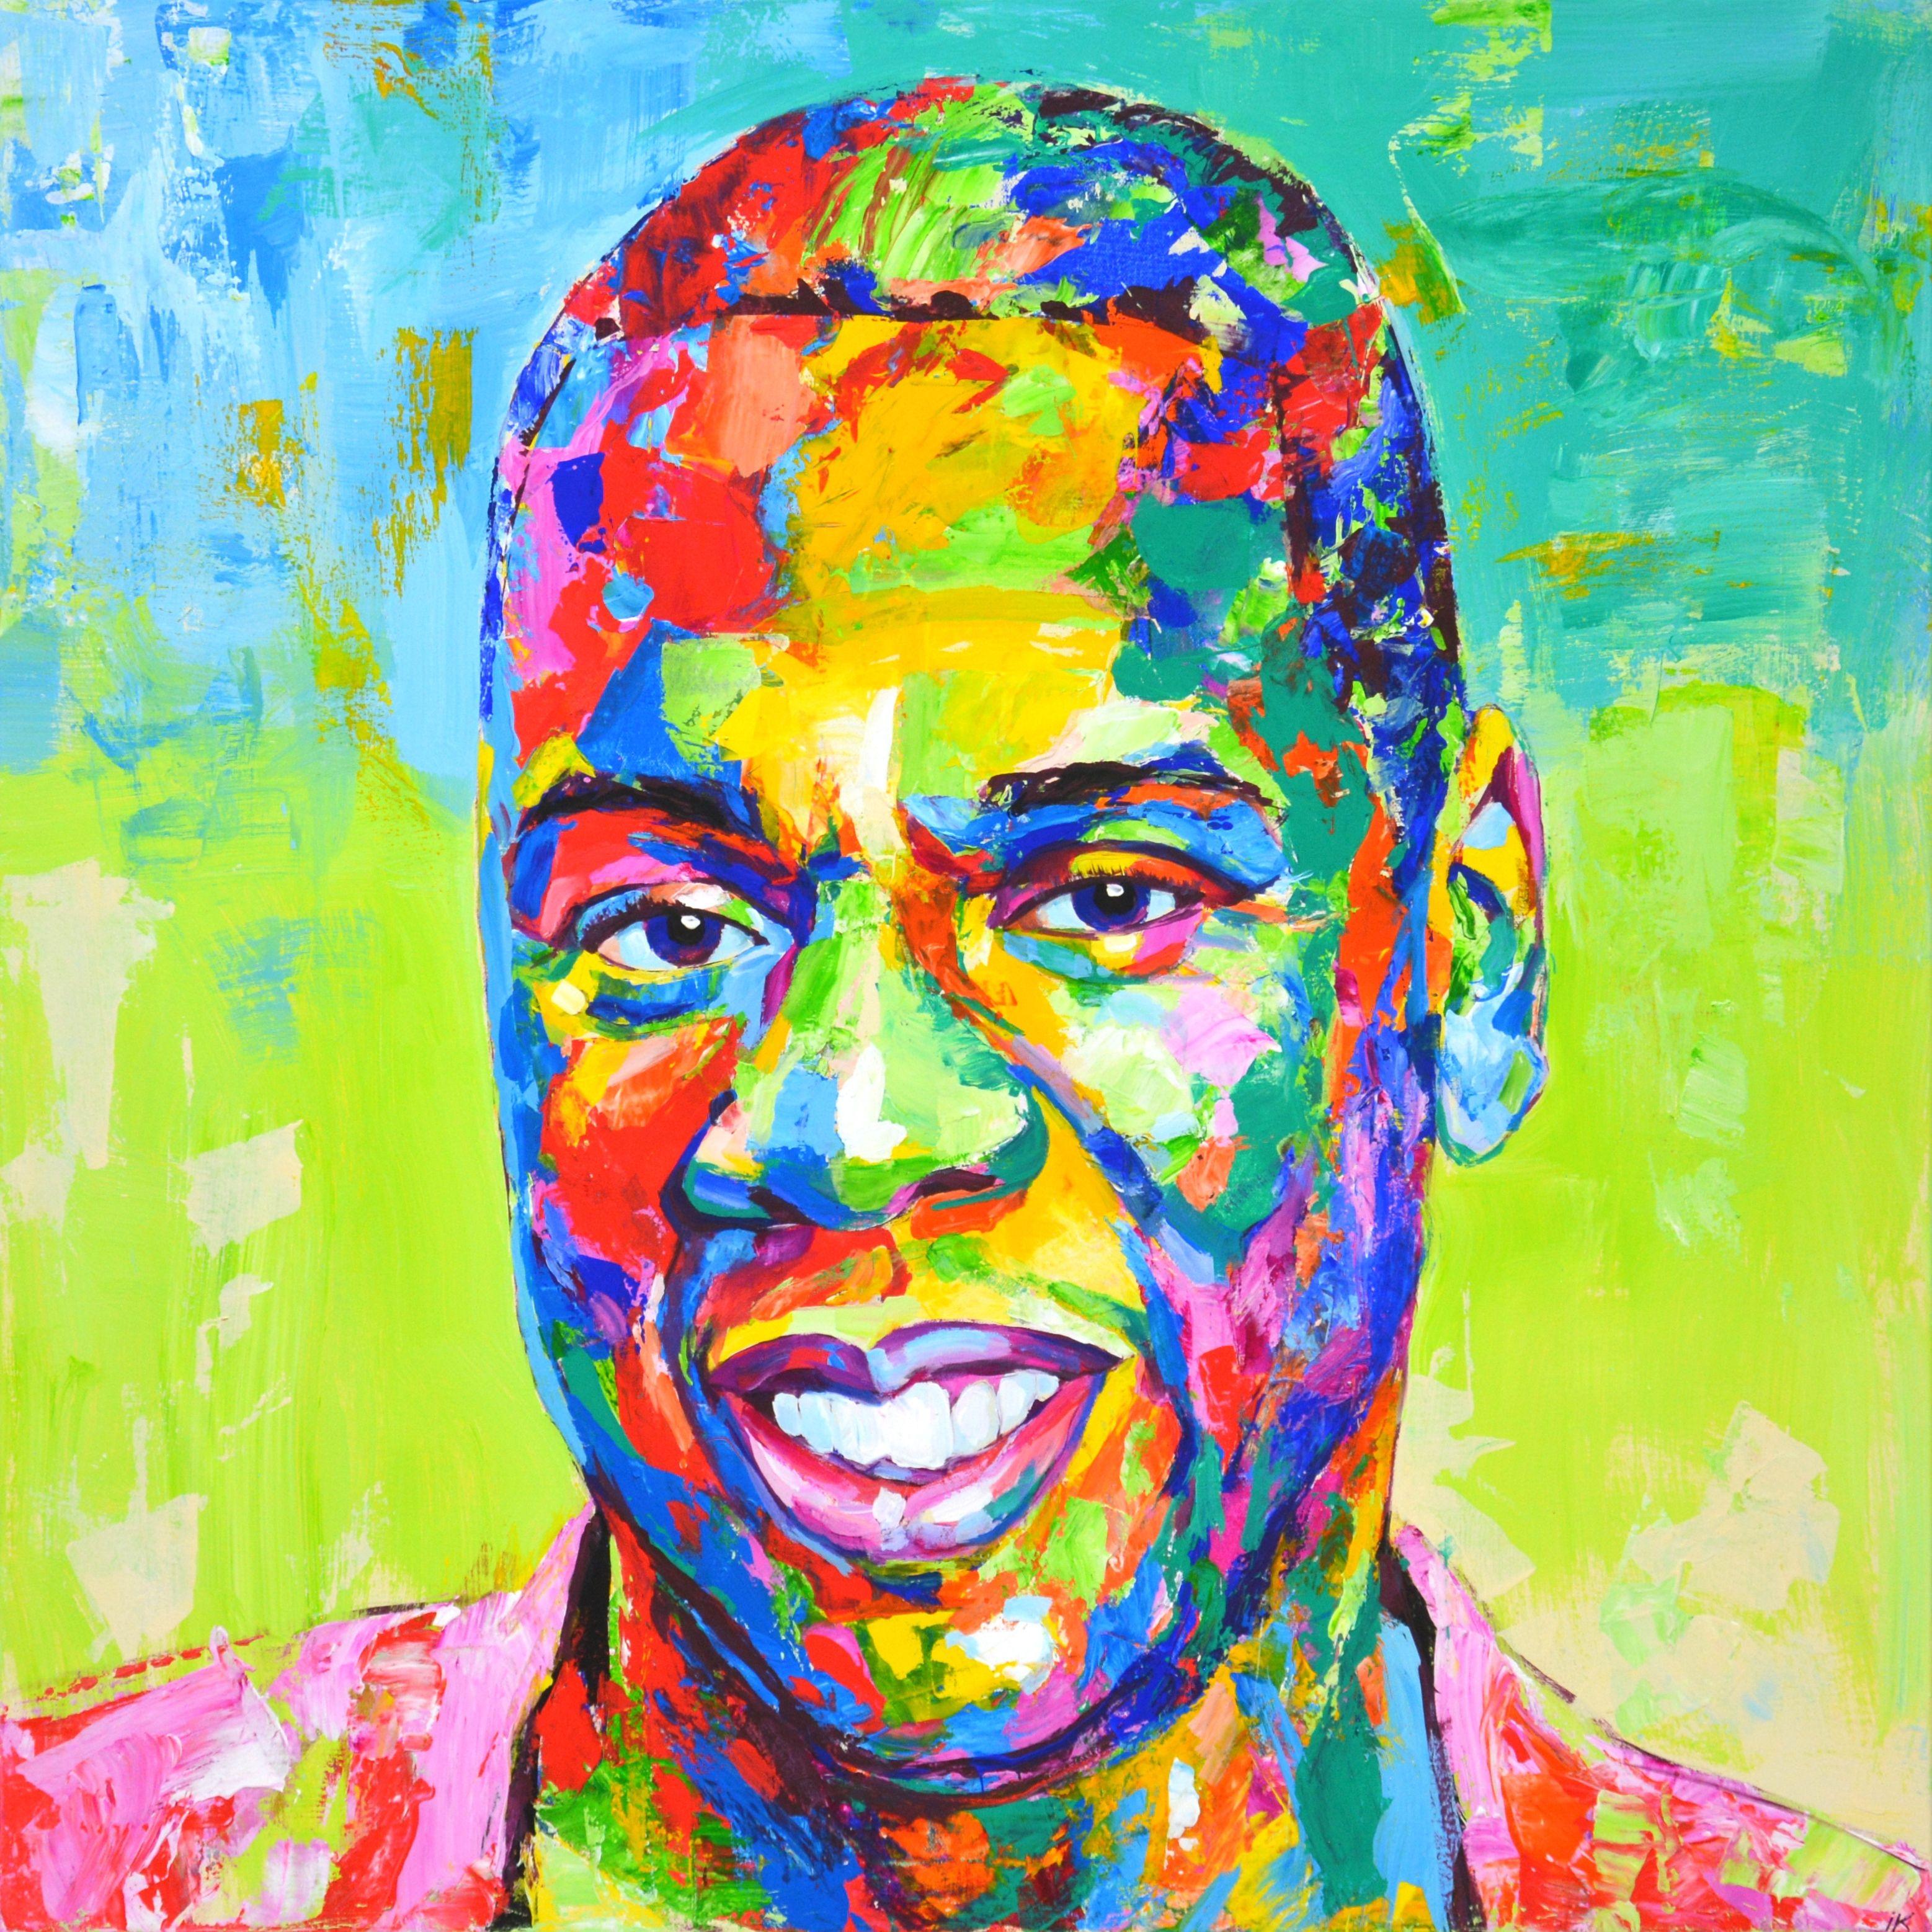 Jay-Z. Shawn Corey Carter, better known by his stage name Jay-Z, is an American rapper, songwriter, record producer, executive producer and entrepreneur. Painted in a modern style with brushes and a palette knife. Pop Art. Expressionism. Realism. A